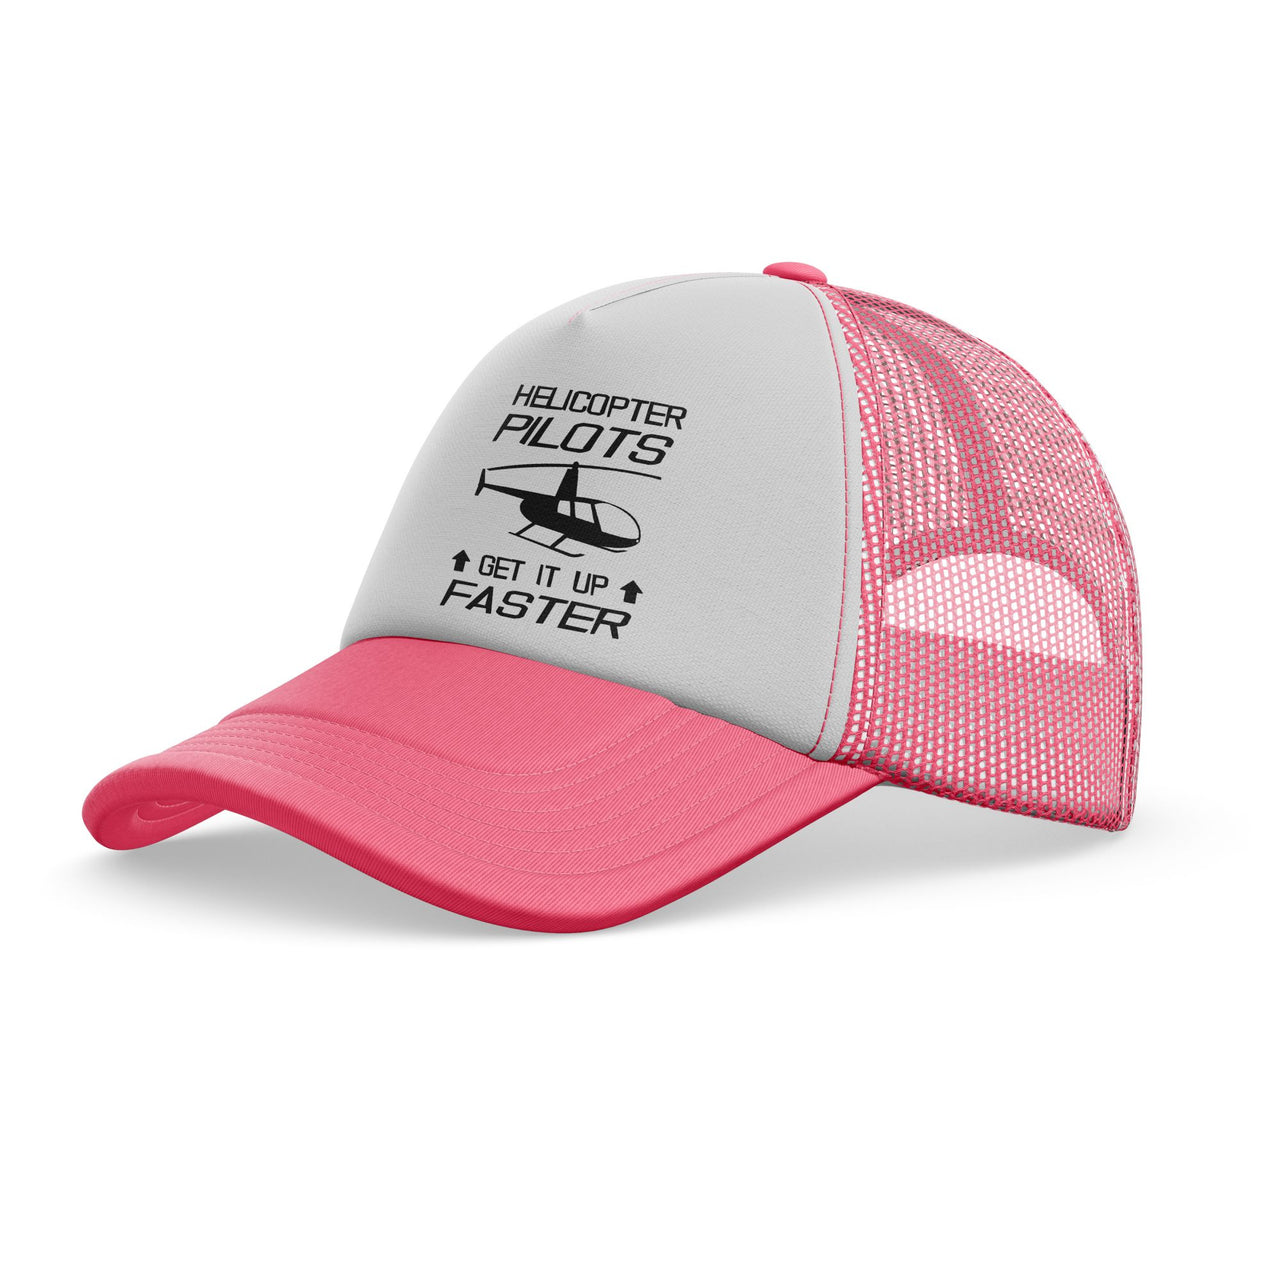 Helicopter Pilots Get It Up Faster Designed Trucker Caps & Hats